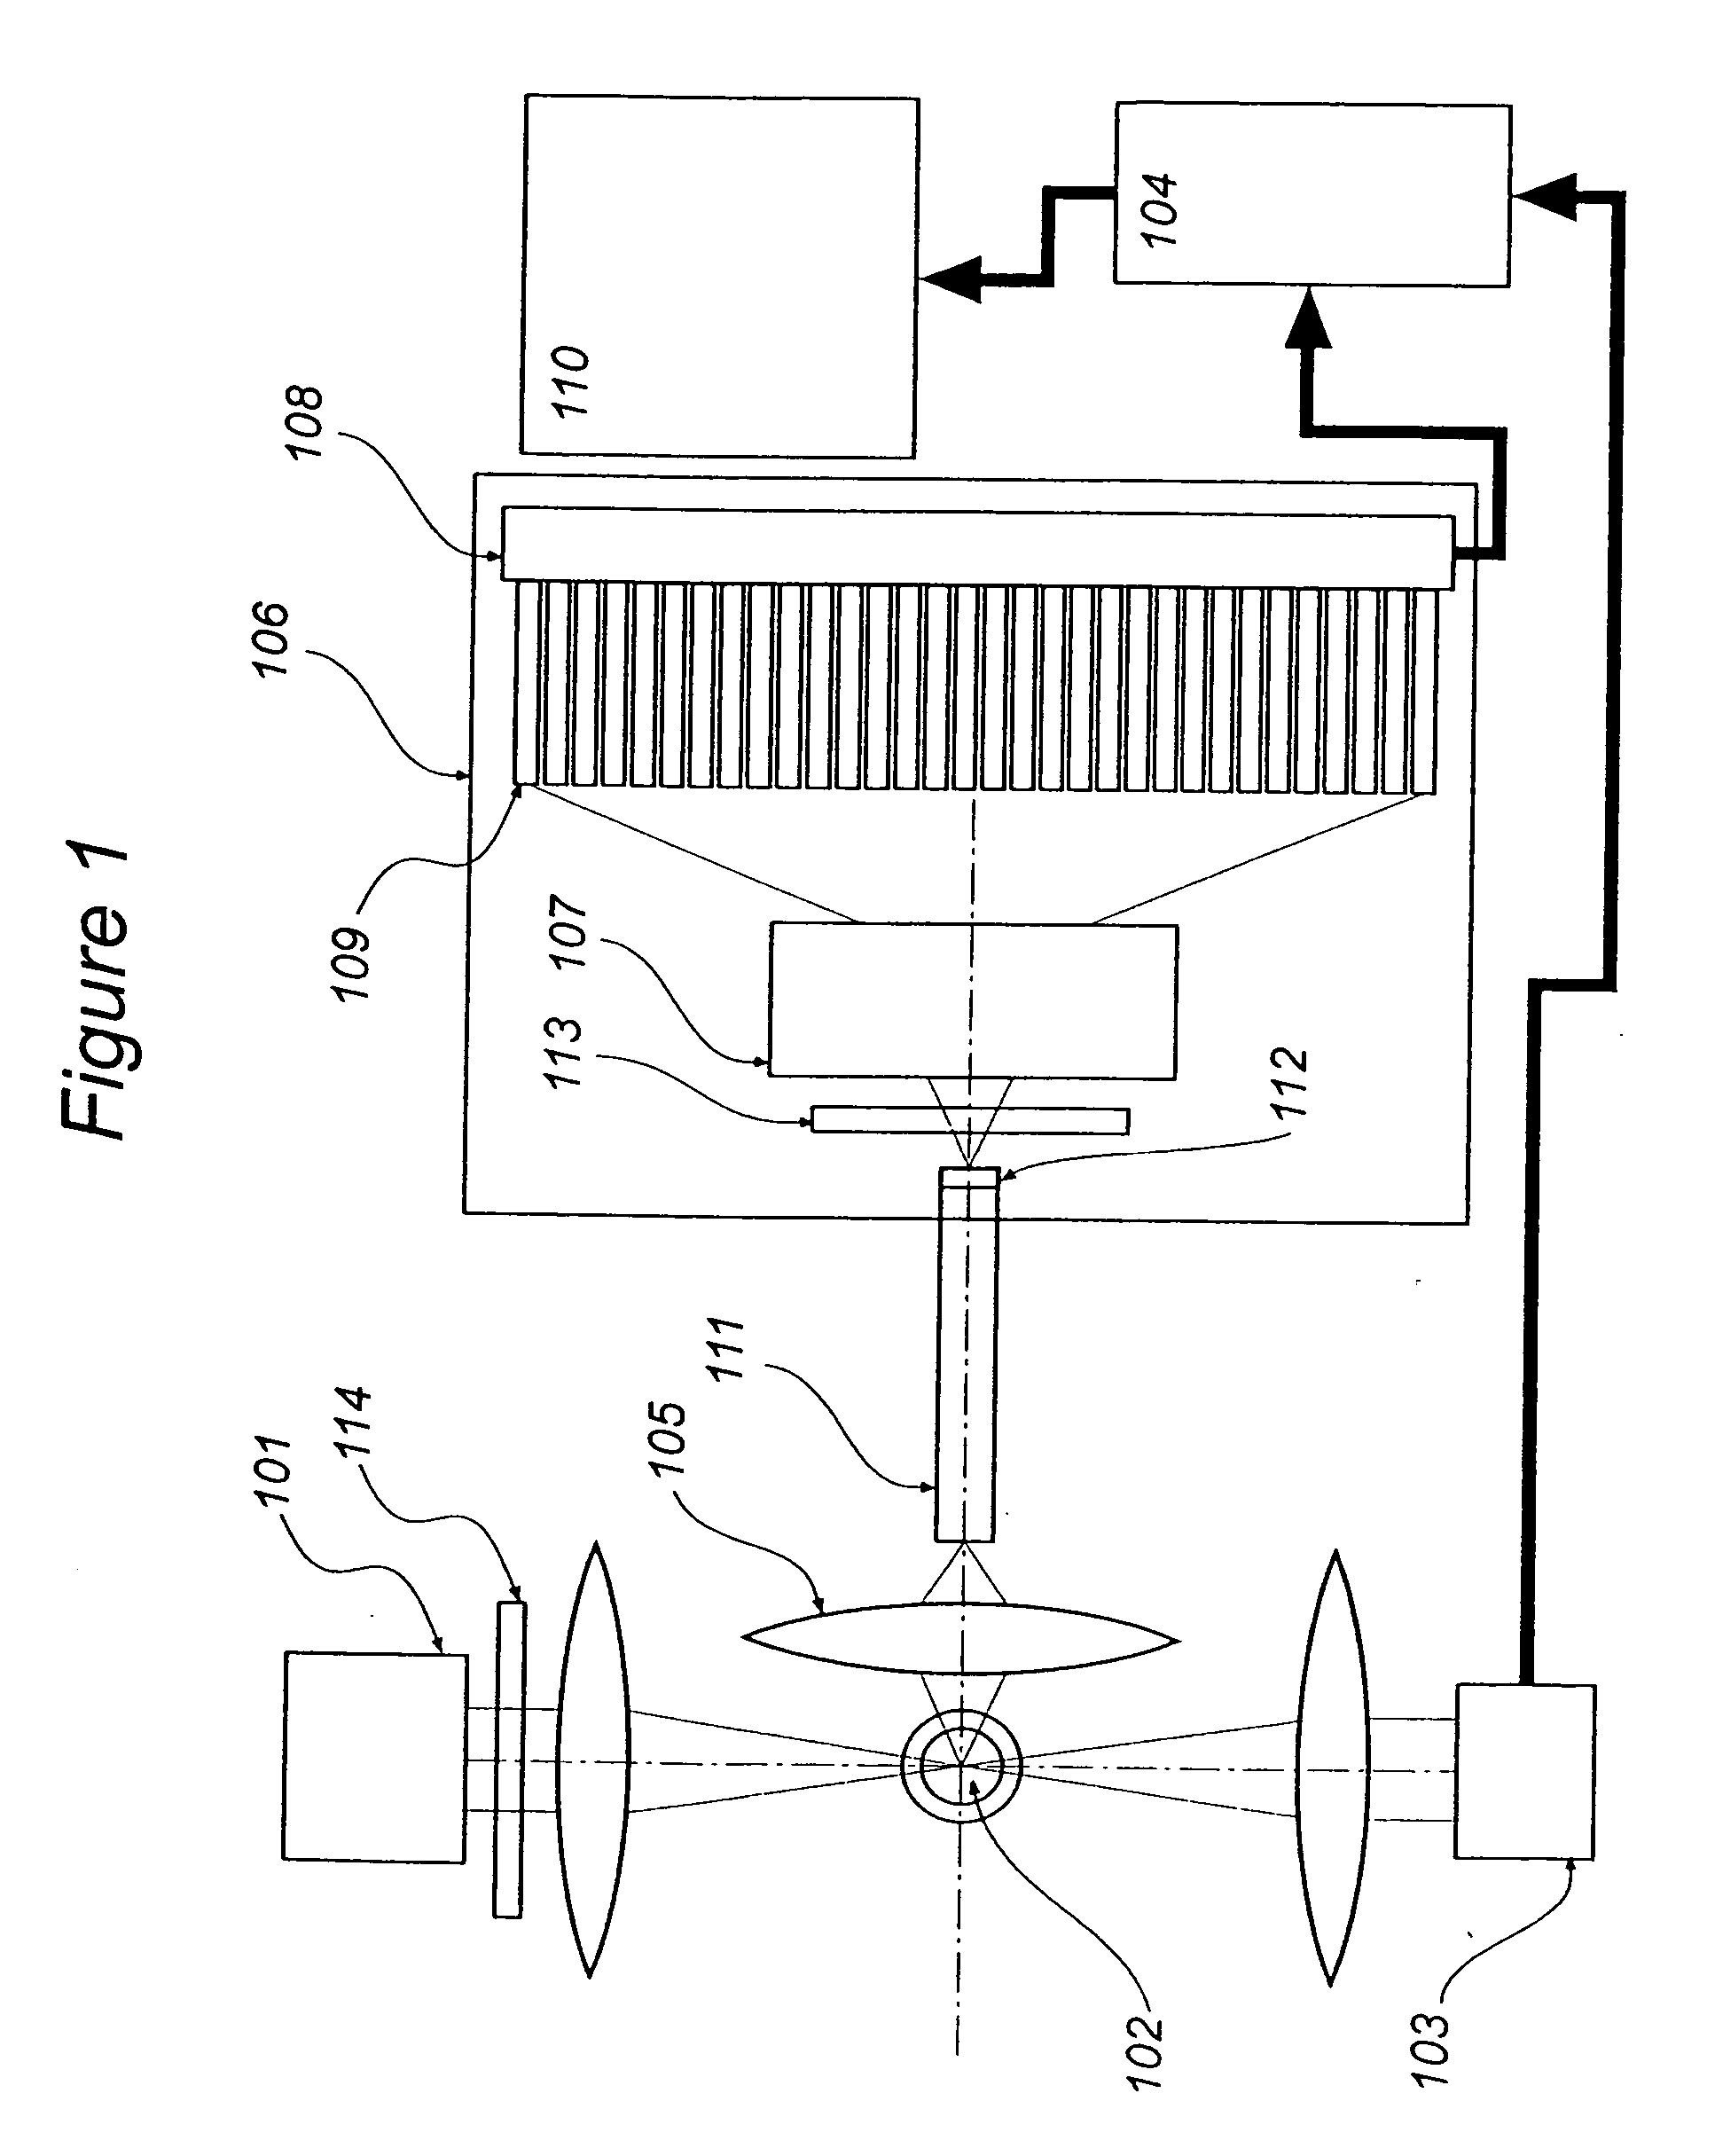 Multi-spectral detector and analysis system